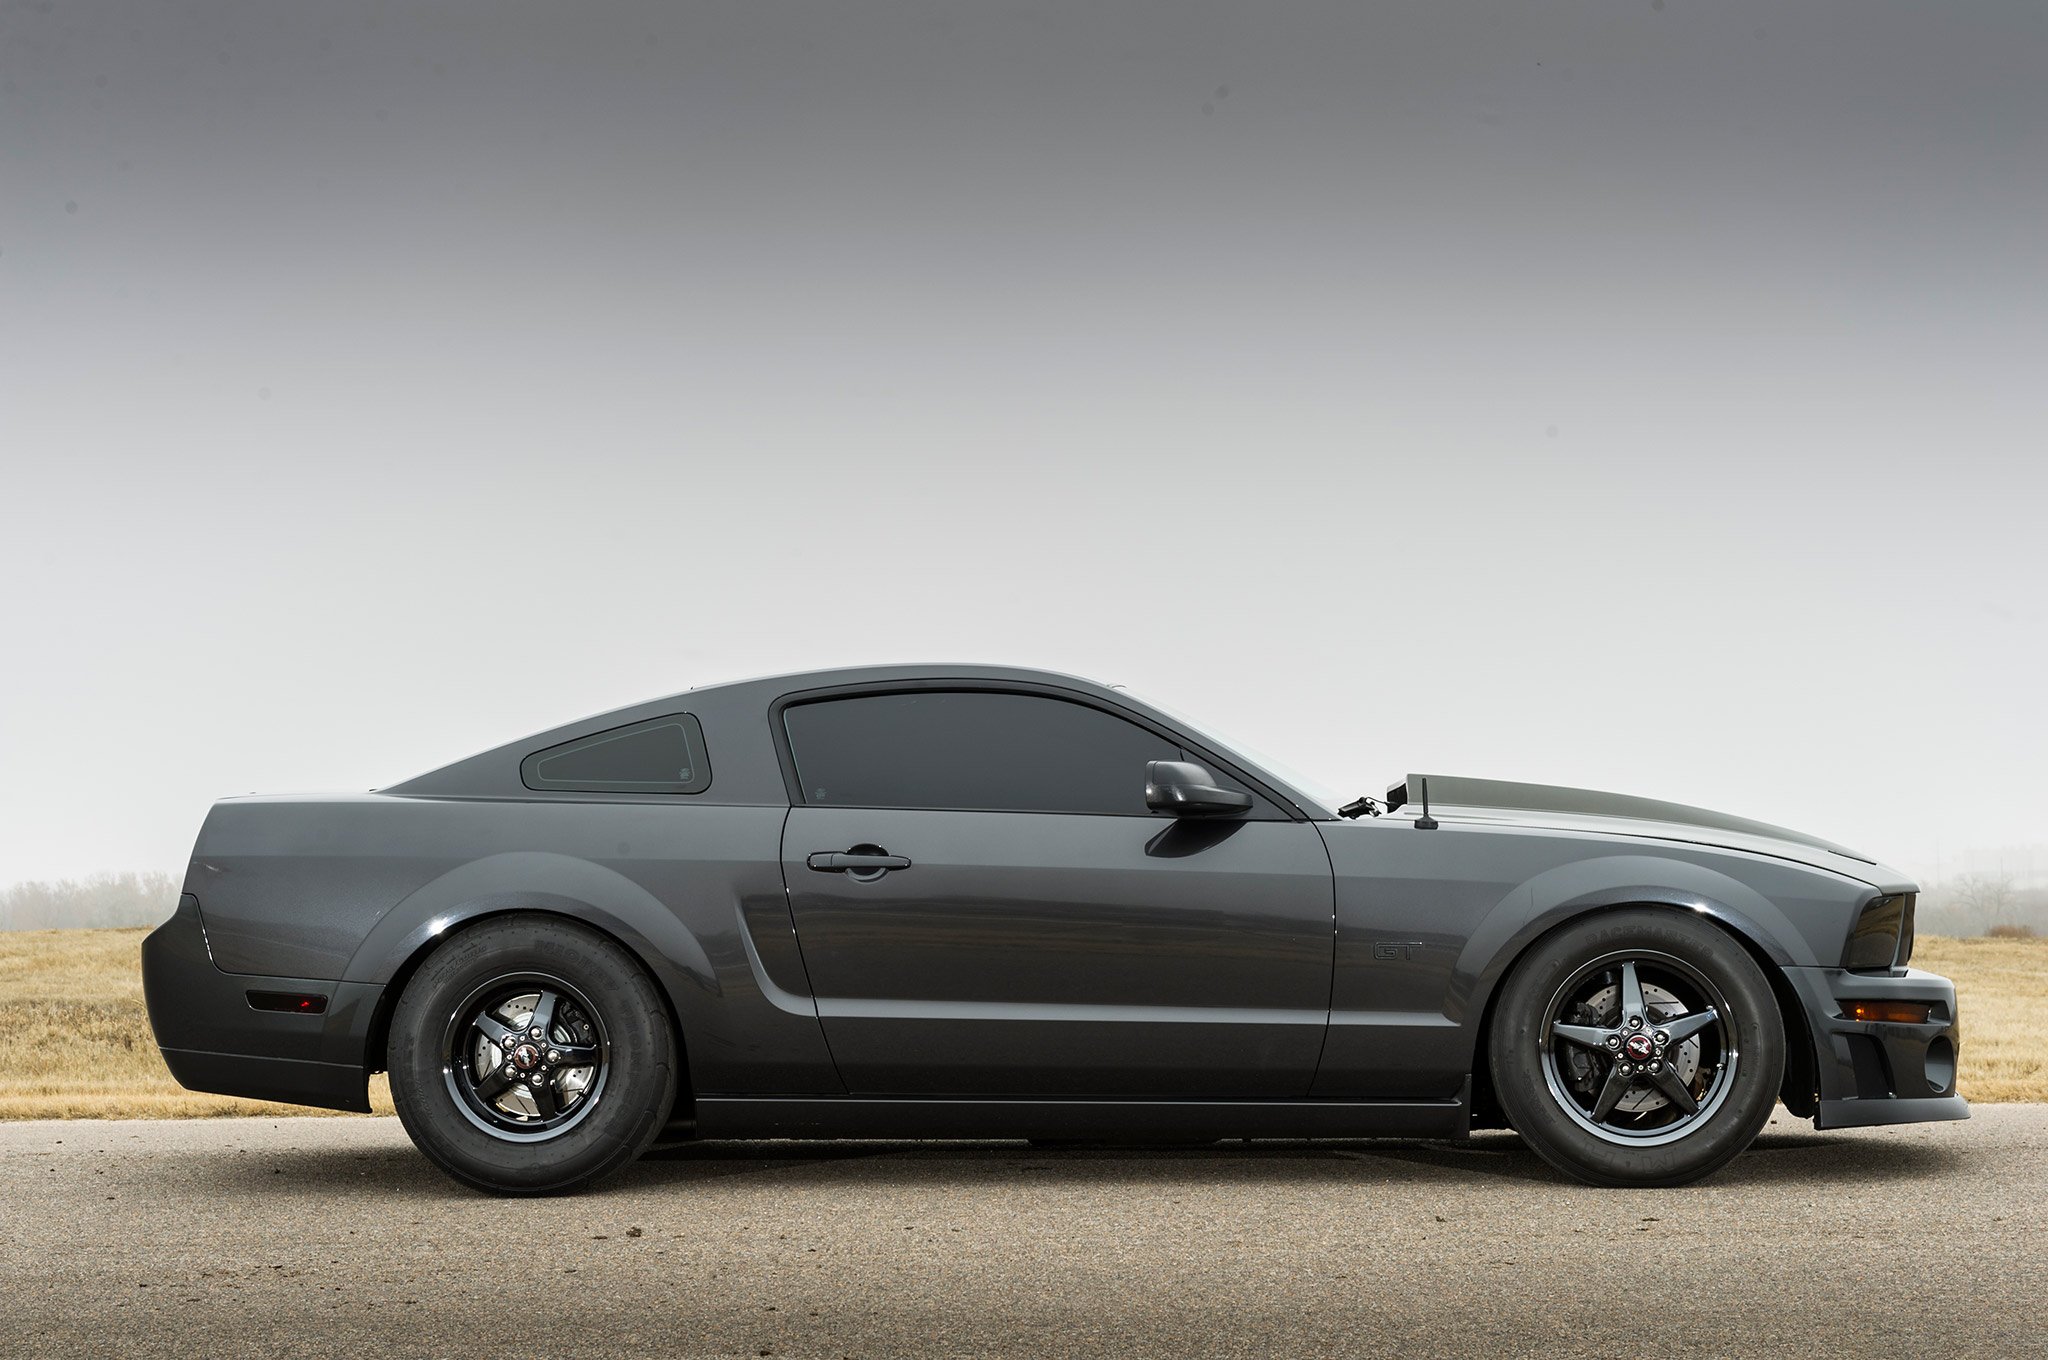 2007, Ford, Mustang, Gt, Pro, Street, Super, Drag, Muscle, Usa, 2048x1360 14 Wallpaper